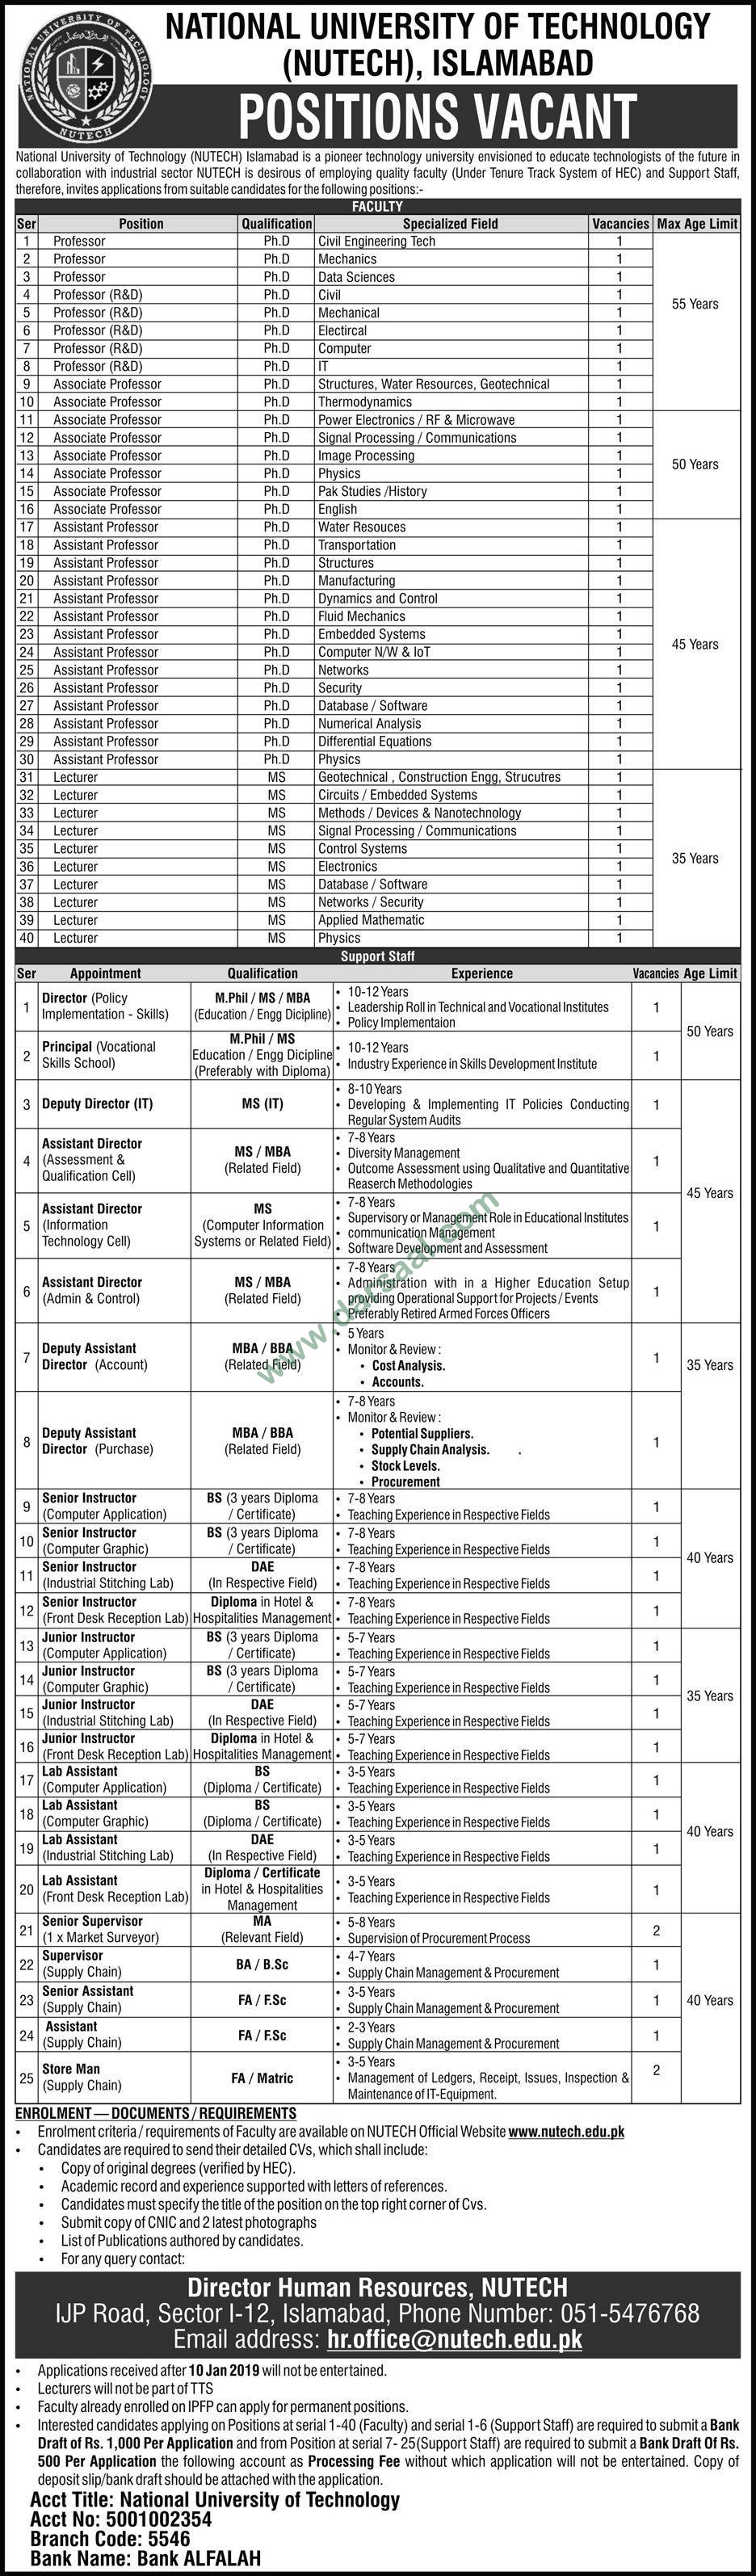 Assistant Jobs in National University of Technology in Islamabad - Dec 24, 2018